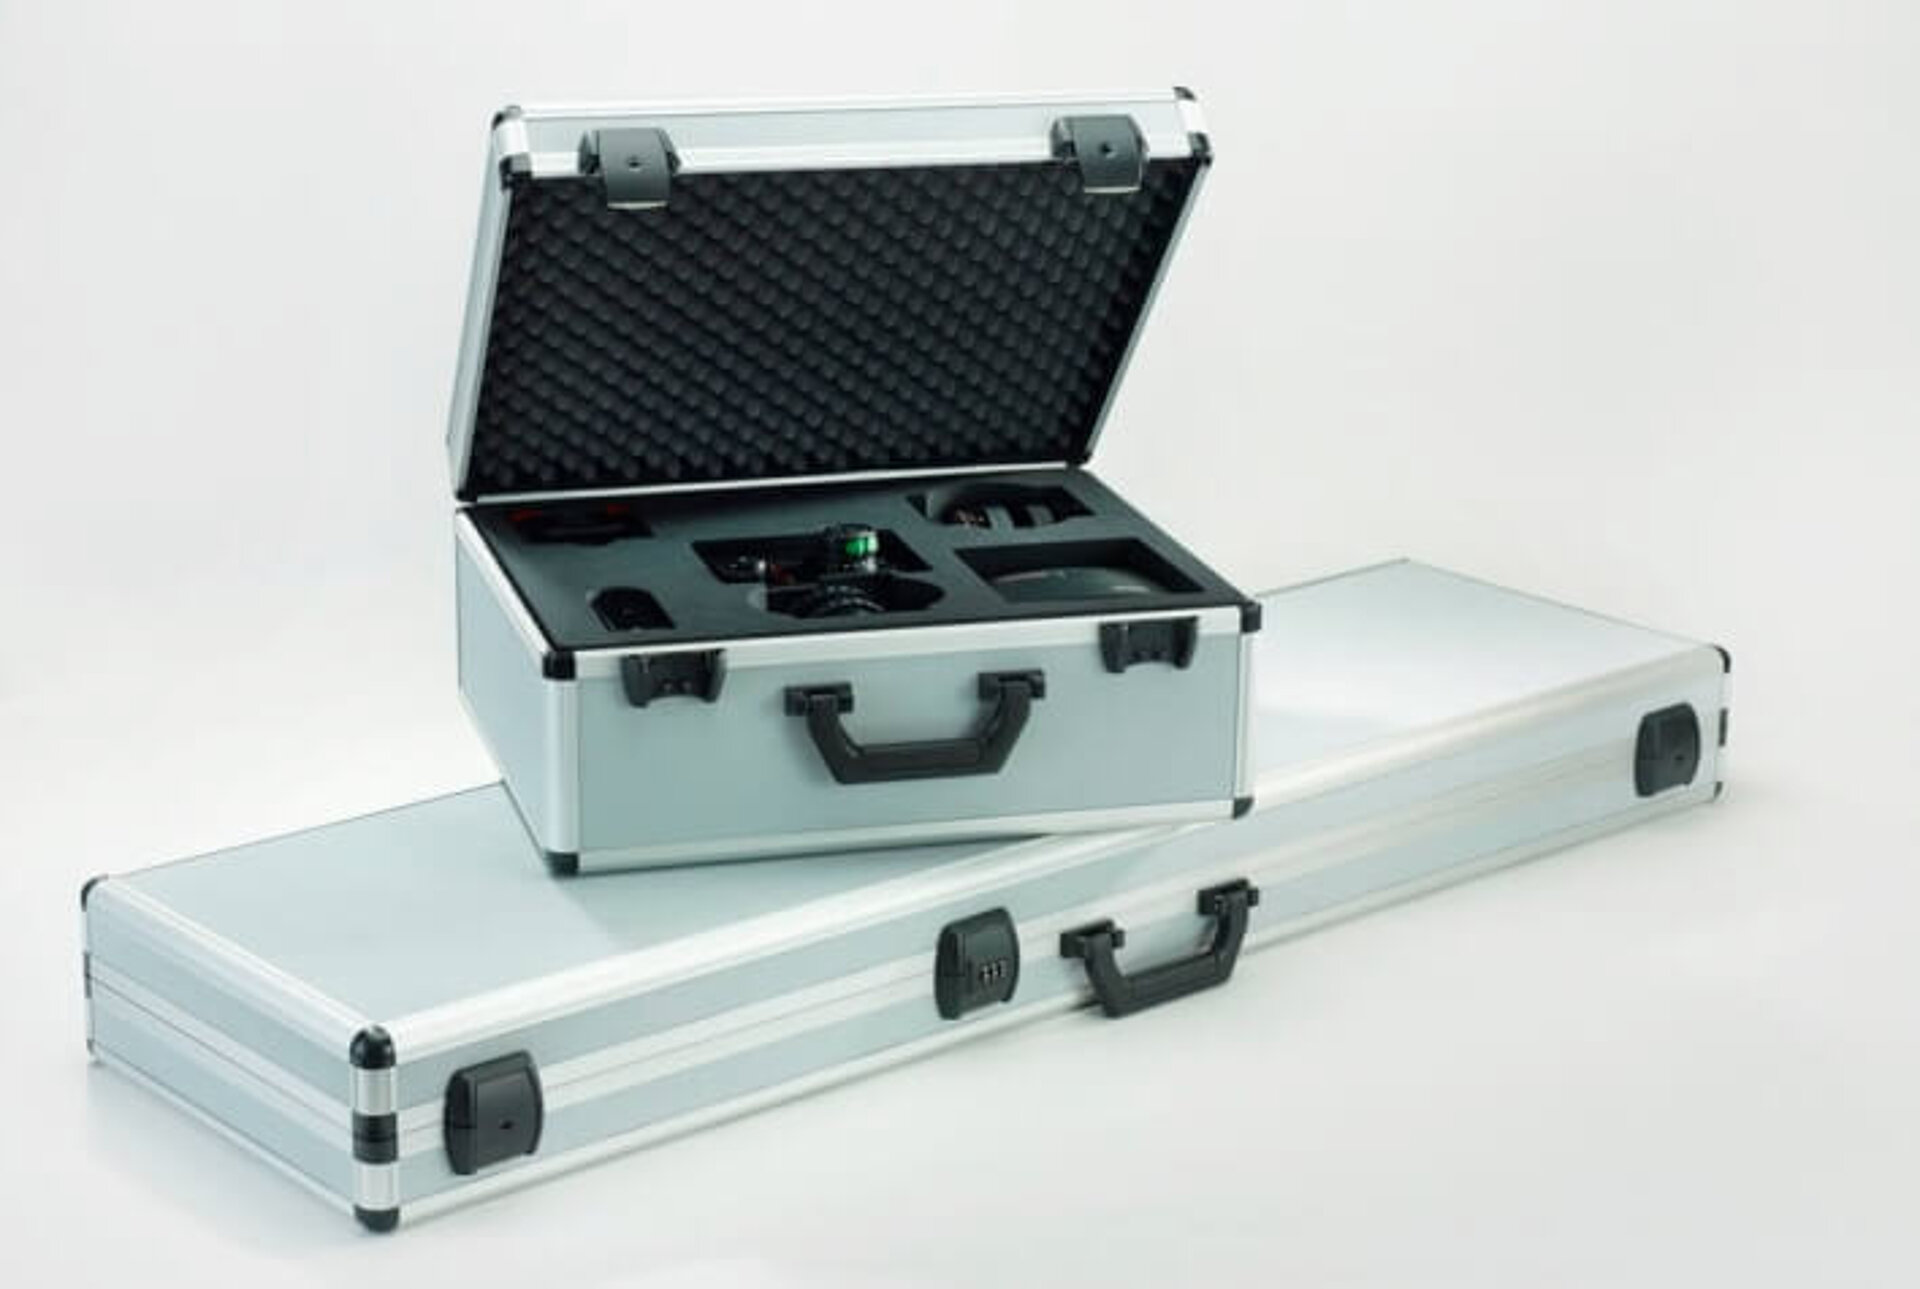 Case inserts made of PE foam for photo equipment